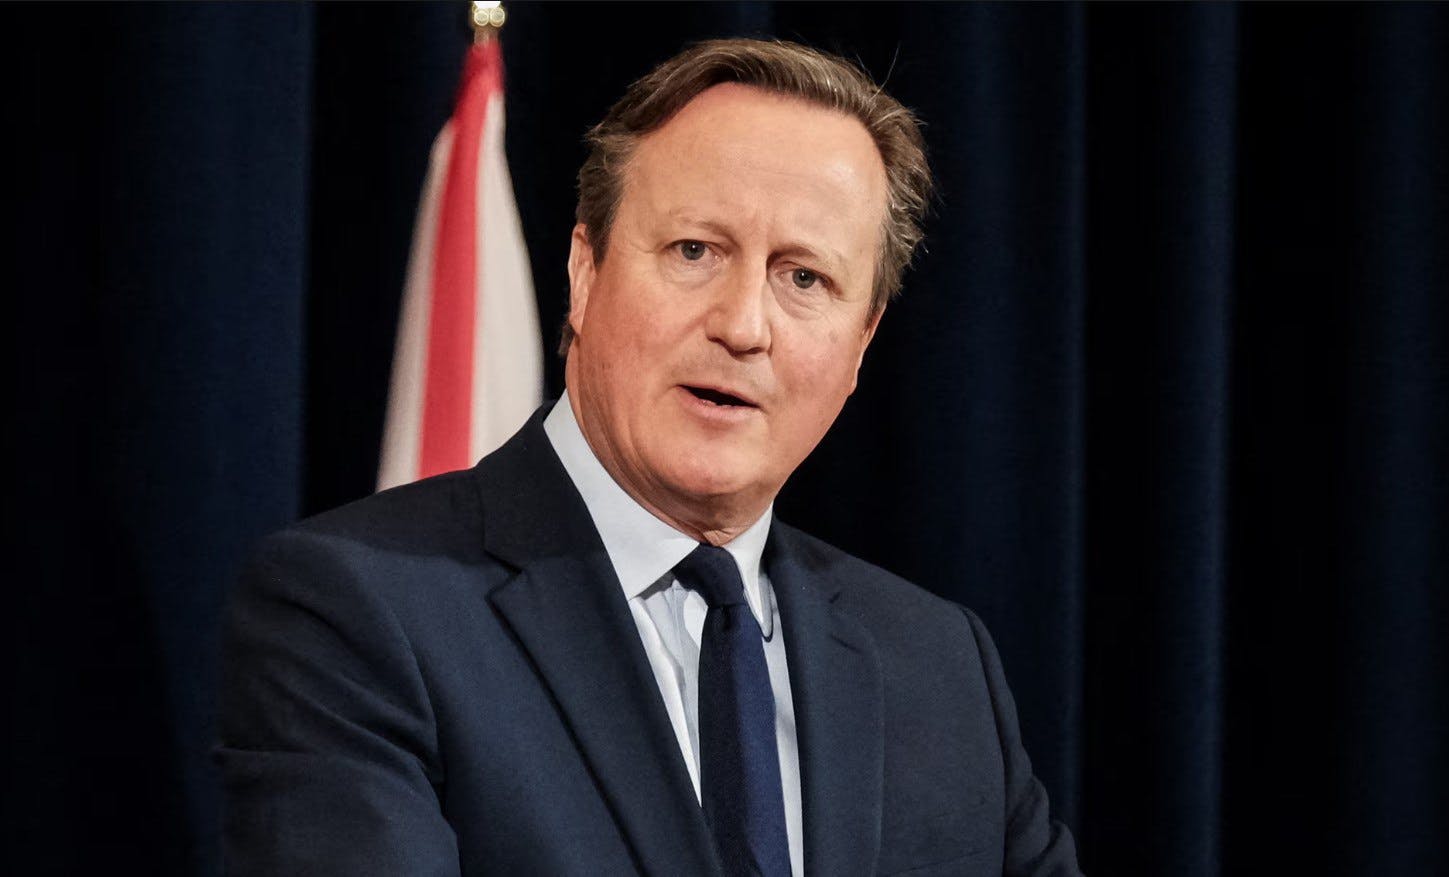 UK Commits £3 Billion Annually in Military Aid to Ukraine, Cameron States